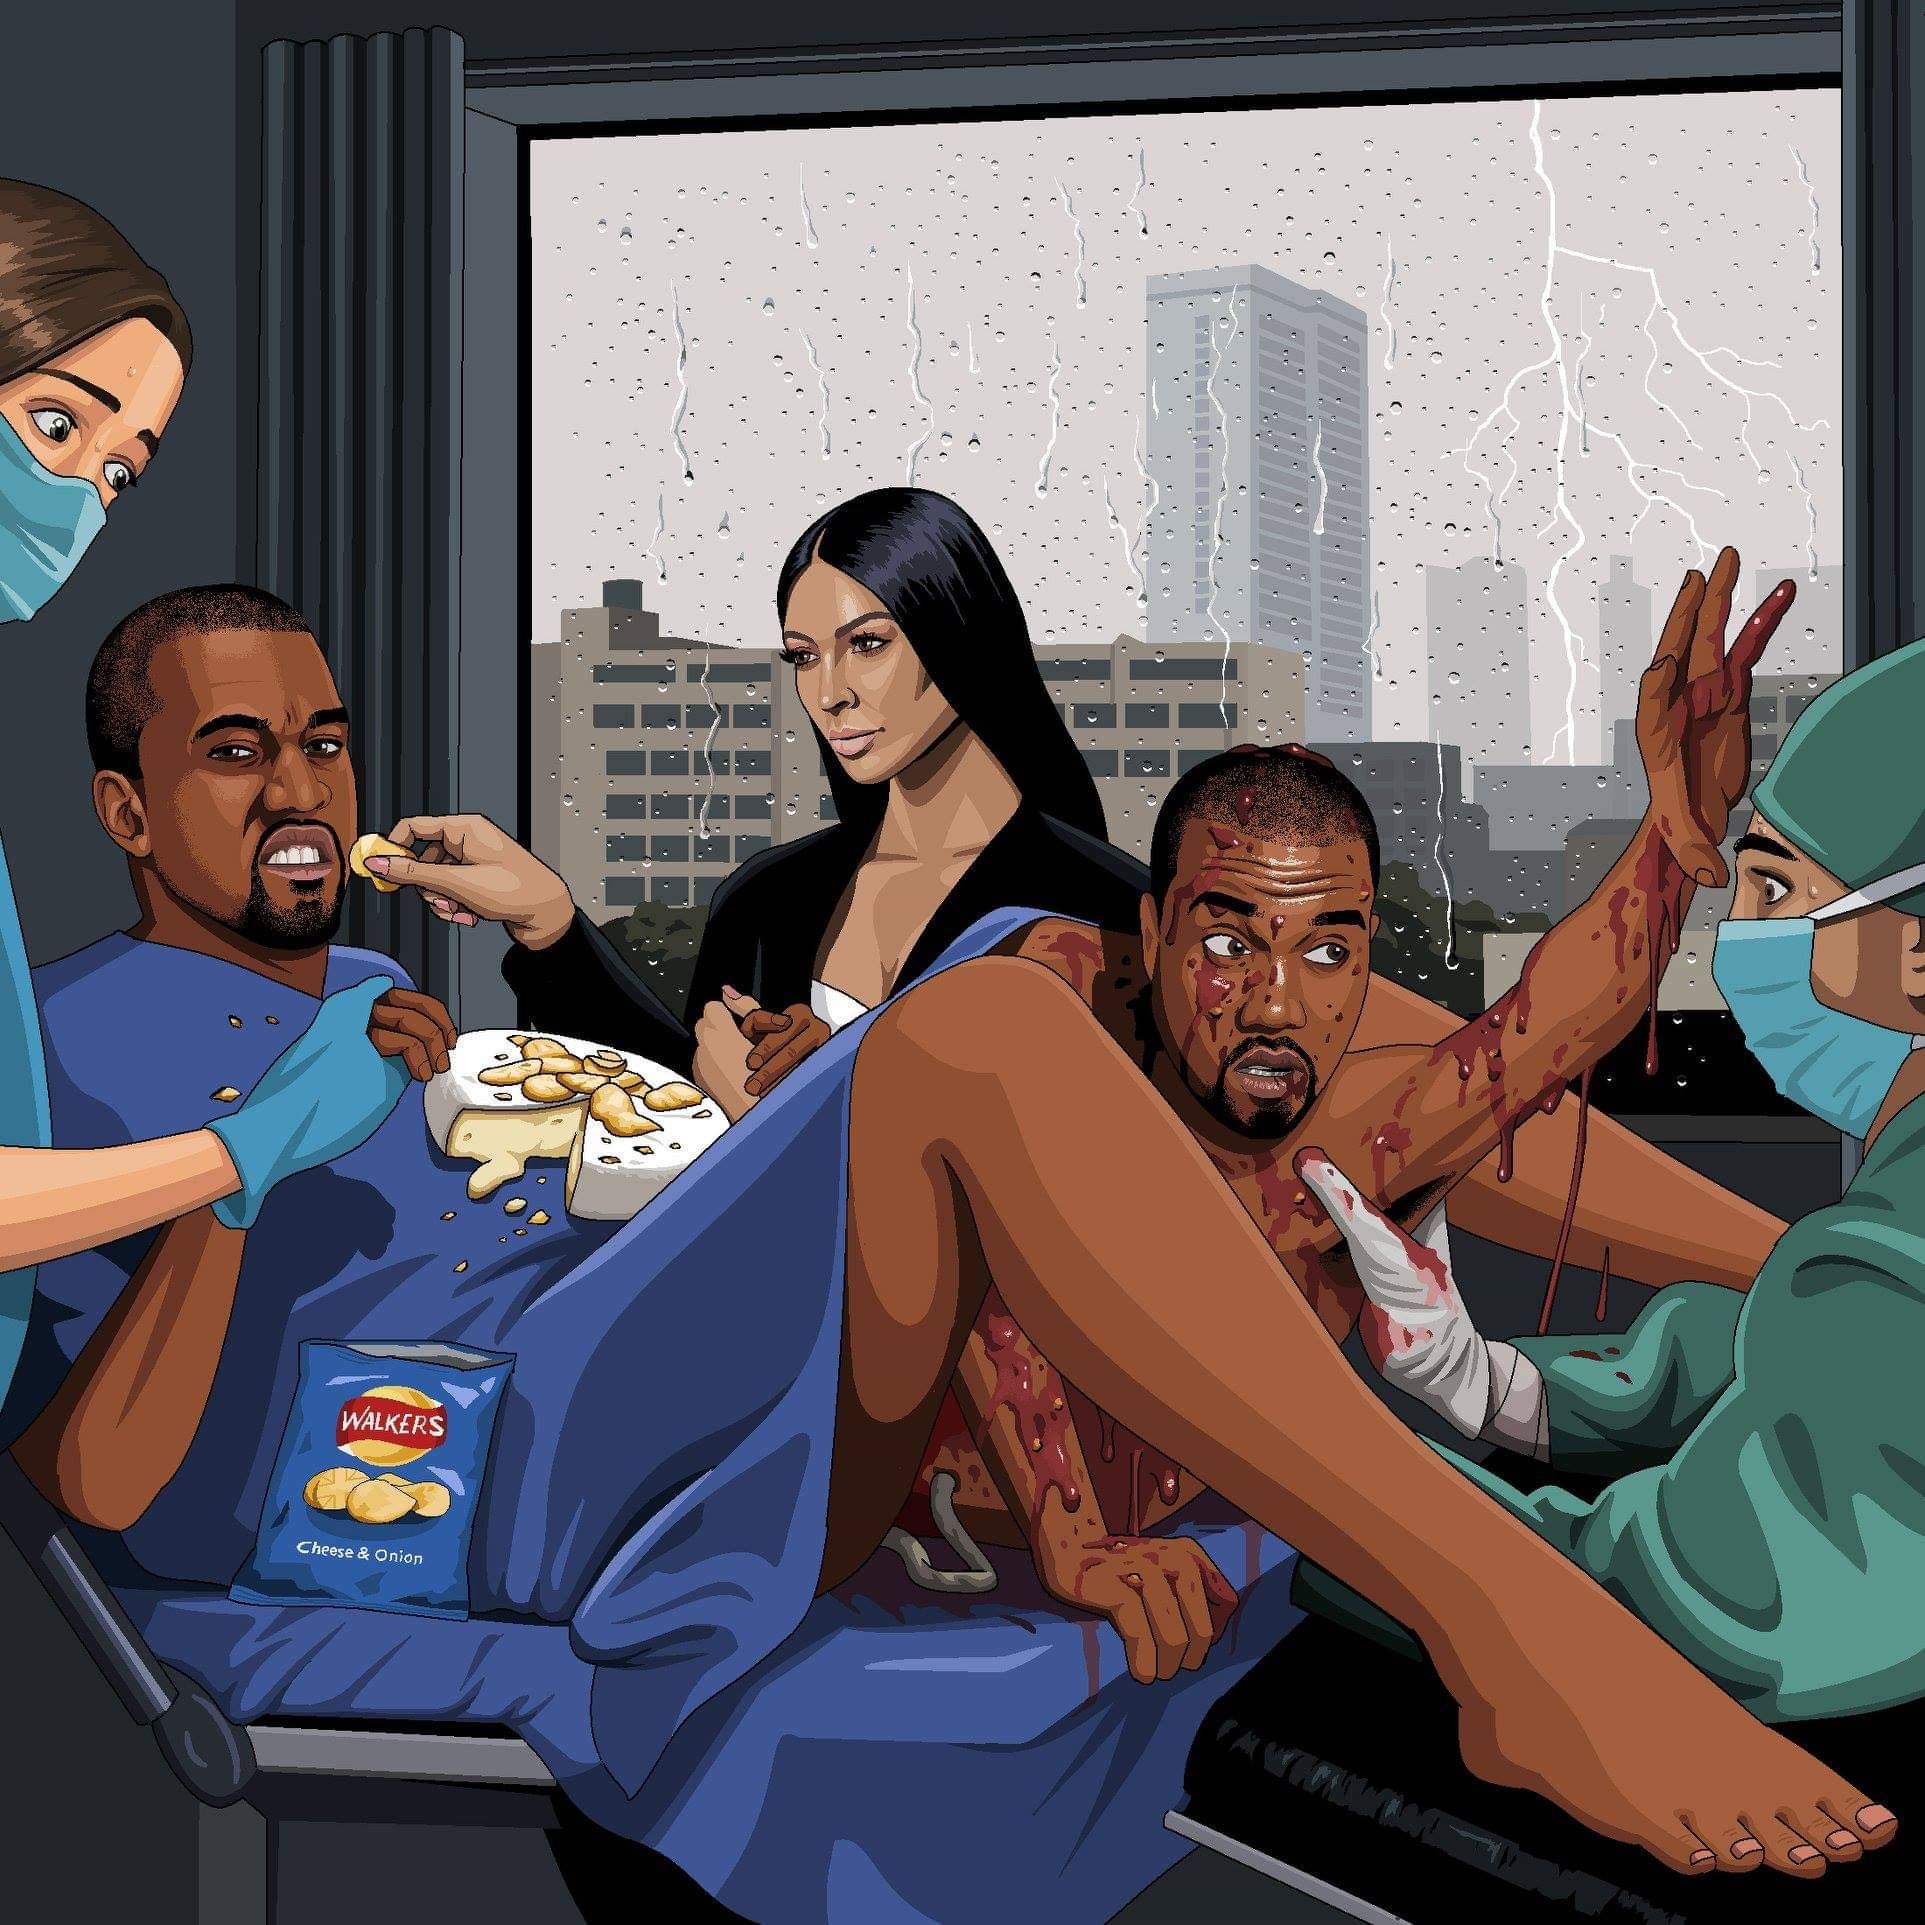 "Can you paint Kanye West giving birth to Kanye West whilst Kim Kardashian feeds him Walkers cheese and onion crisps on a bed of Brie?"